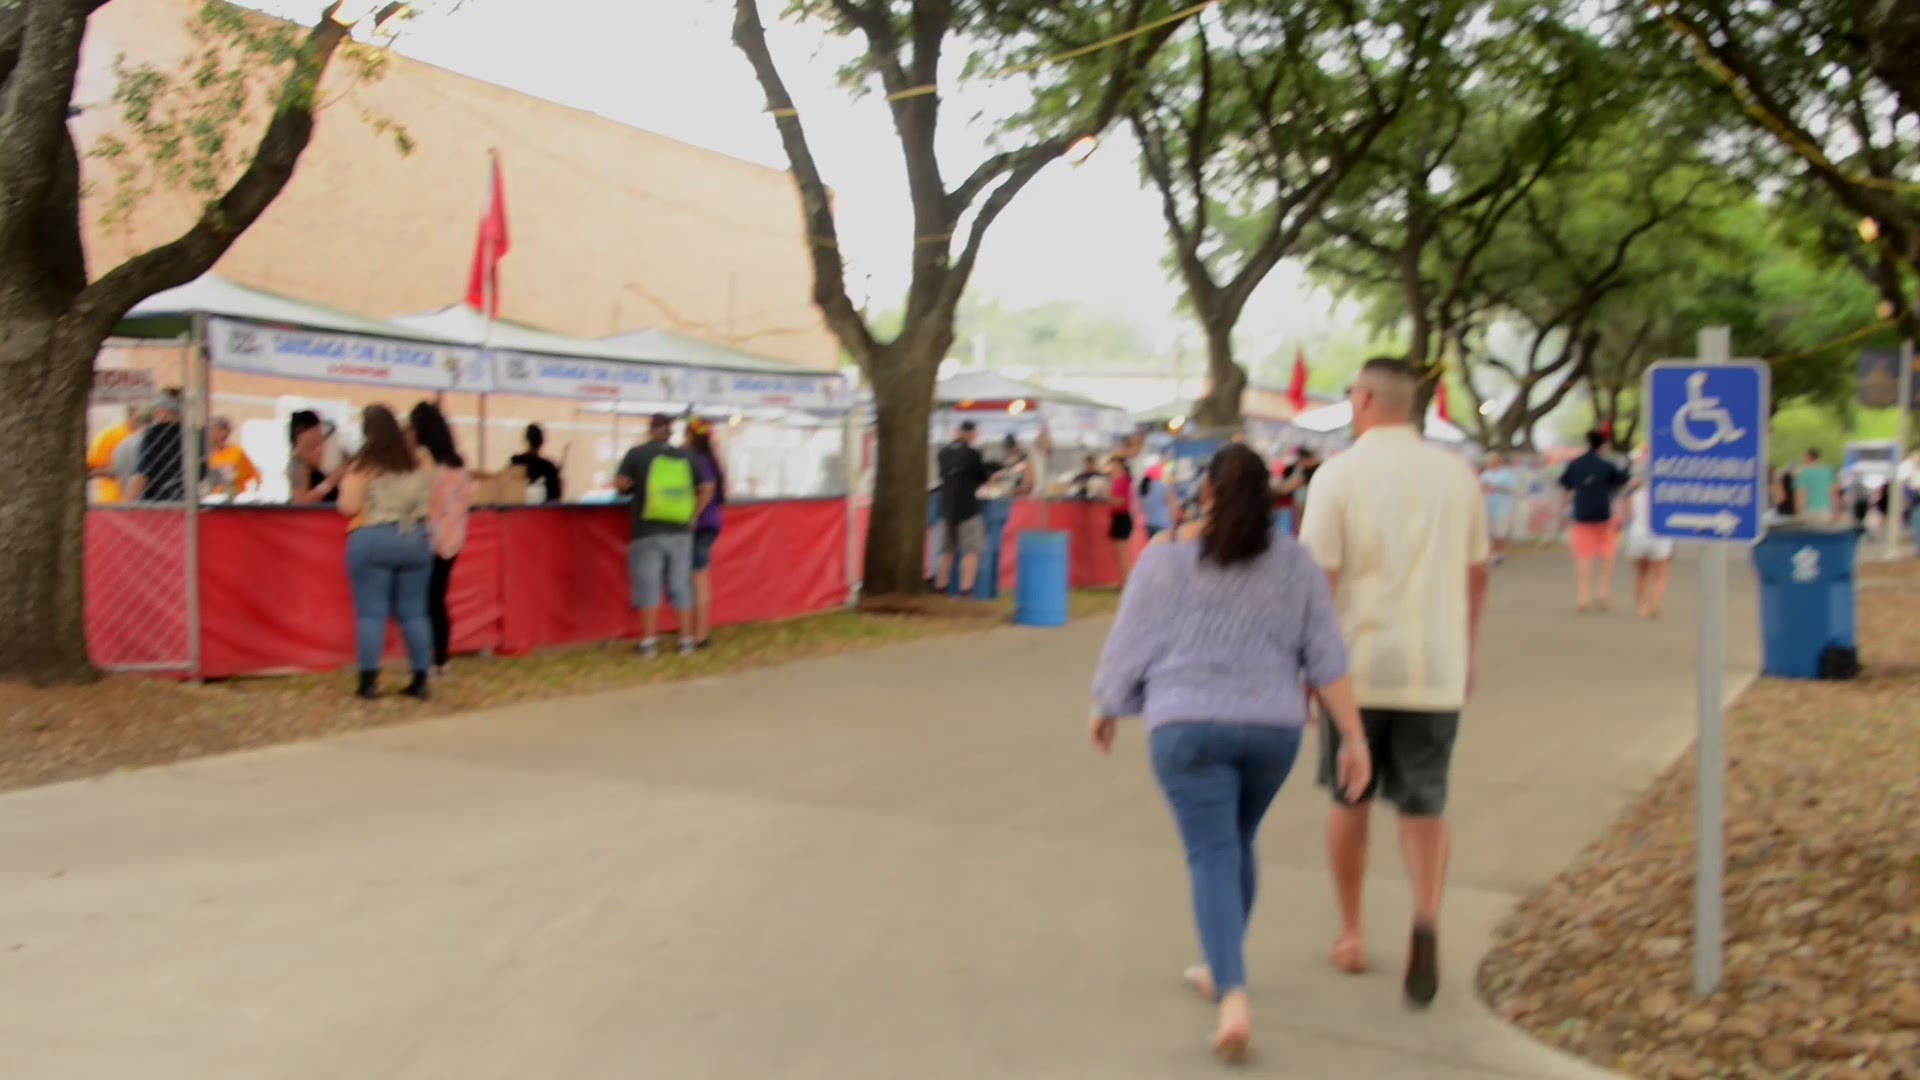 While Friday wasn't the official start of Fiesta San Antonio, at St. Mary's University, Oyster Bake was in full swing. Here's what's shakin' and bakin' at this year's event.